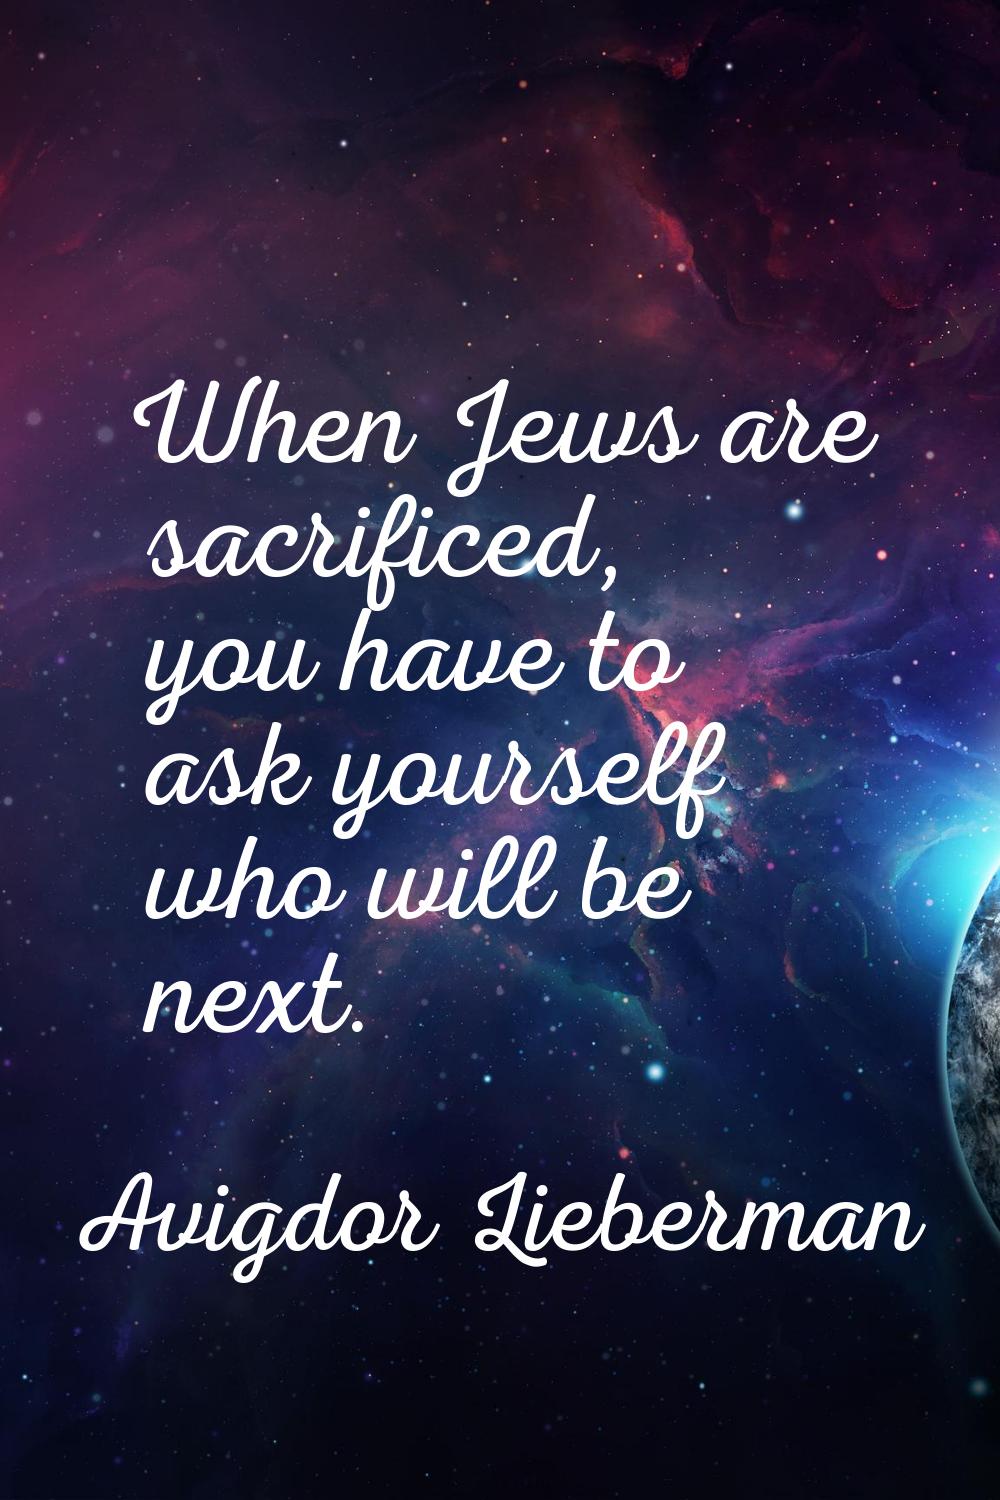 When Jews are sacrificed, you have to ask yourself who will be next.